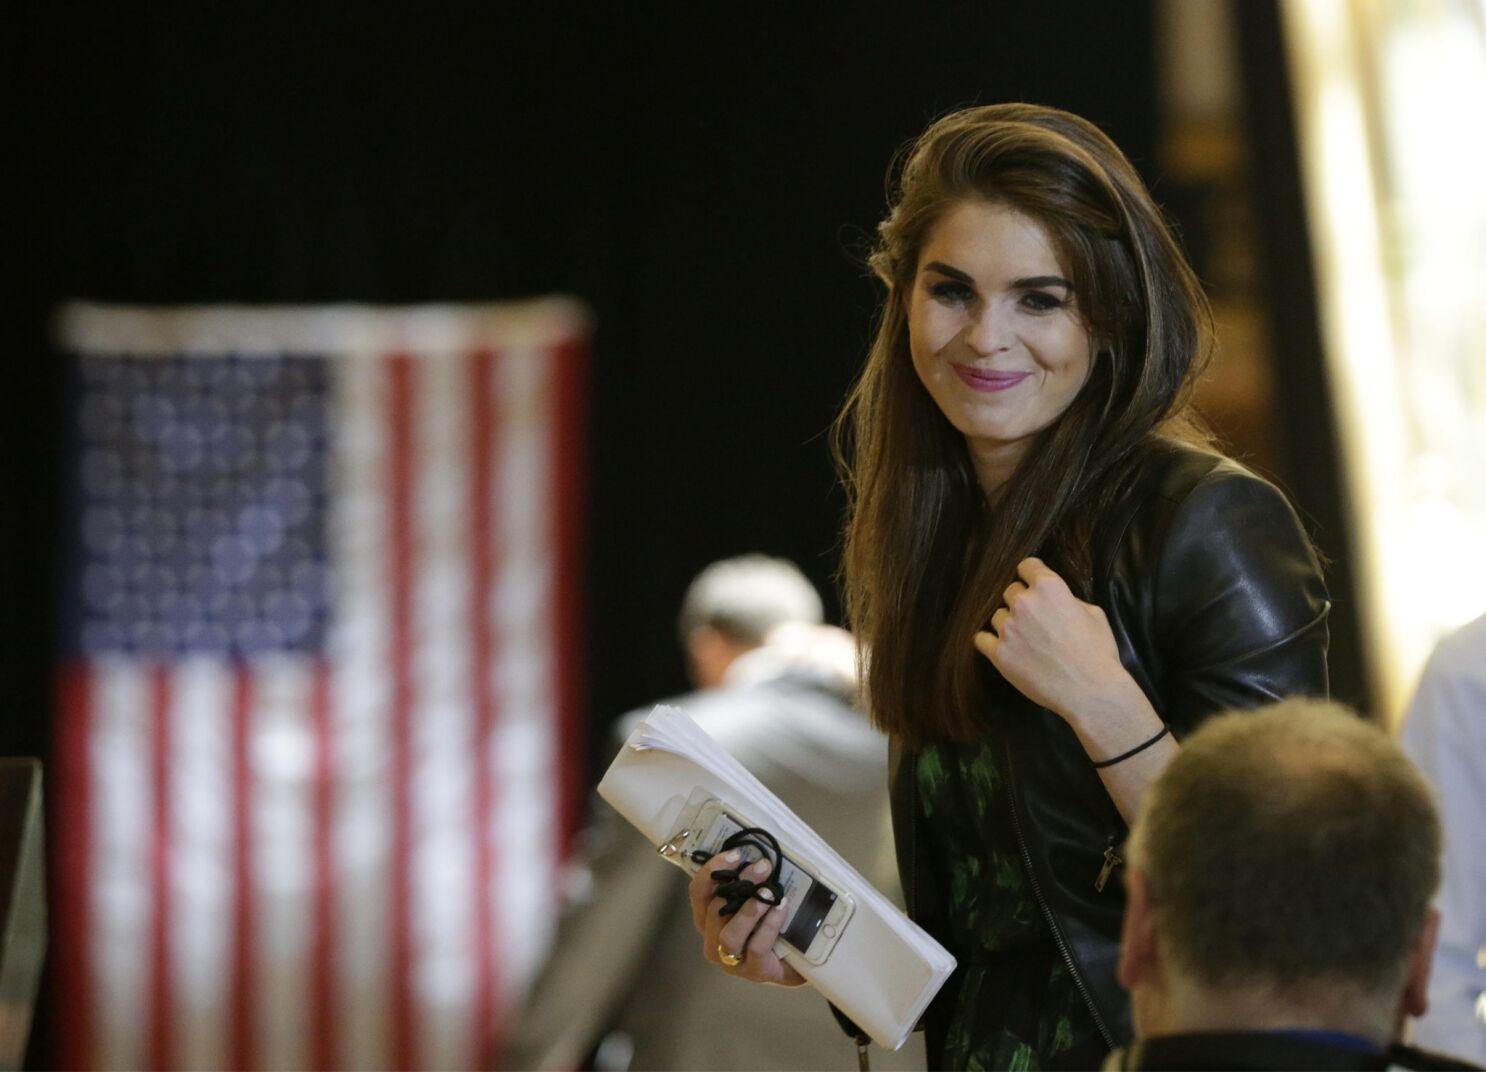 Column: Who is Hope Hicks, anyway? - Los Angeles Times